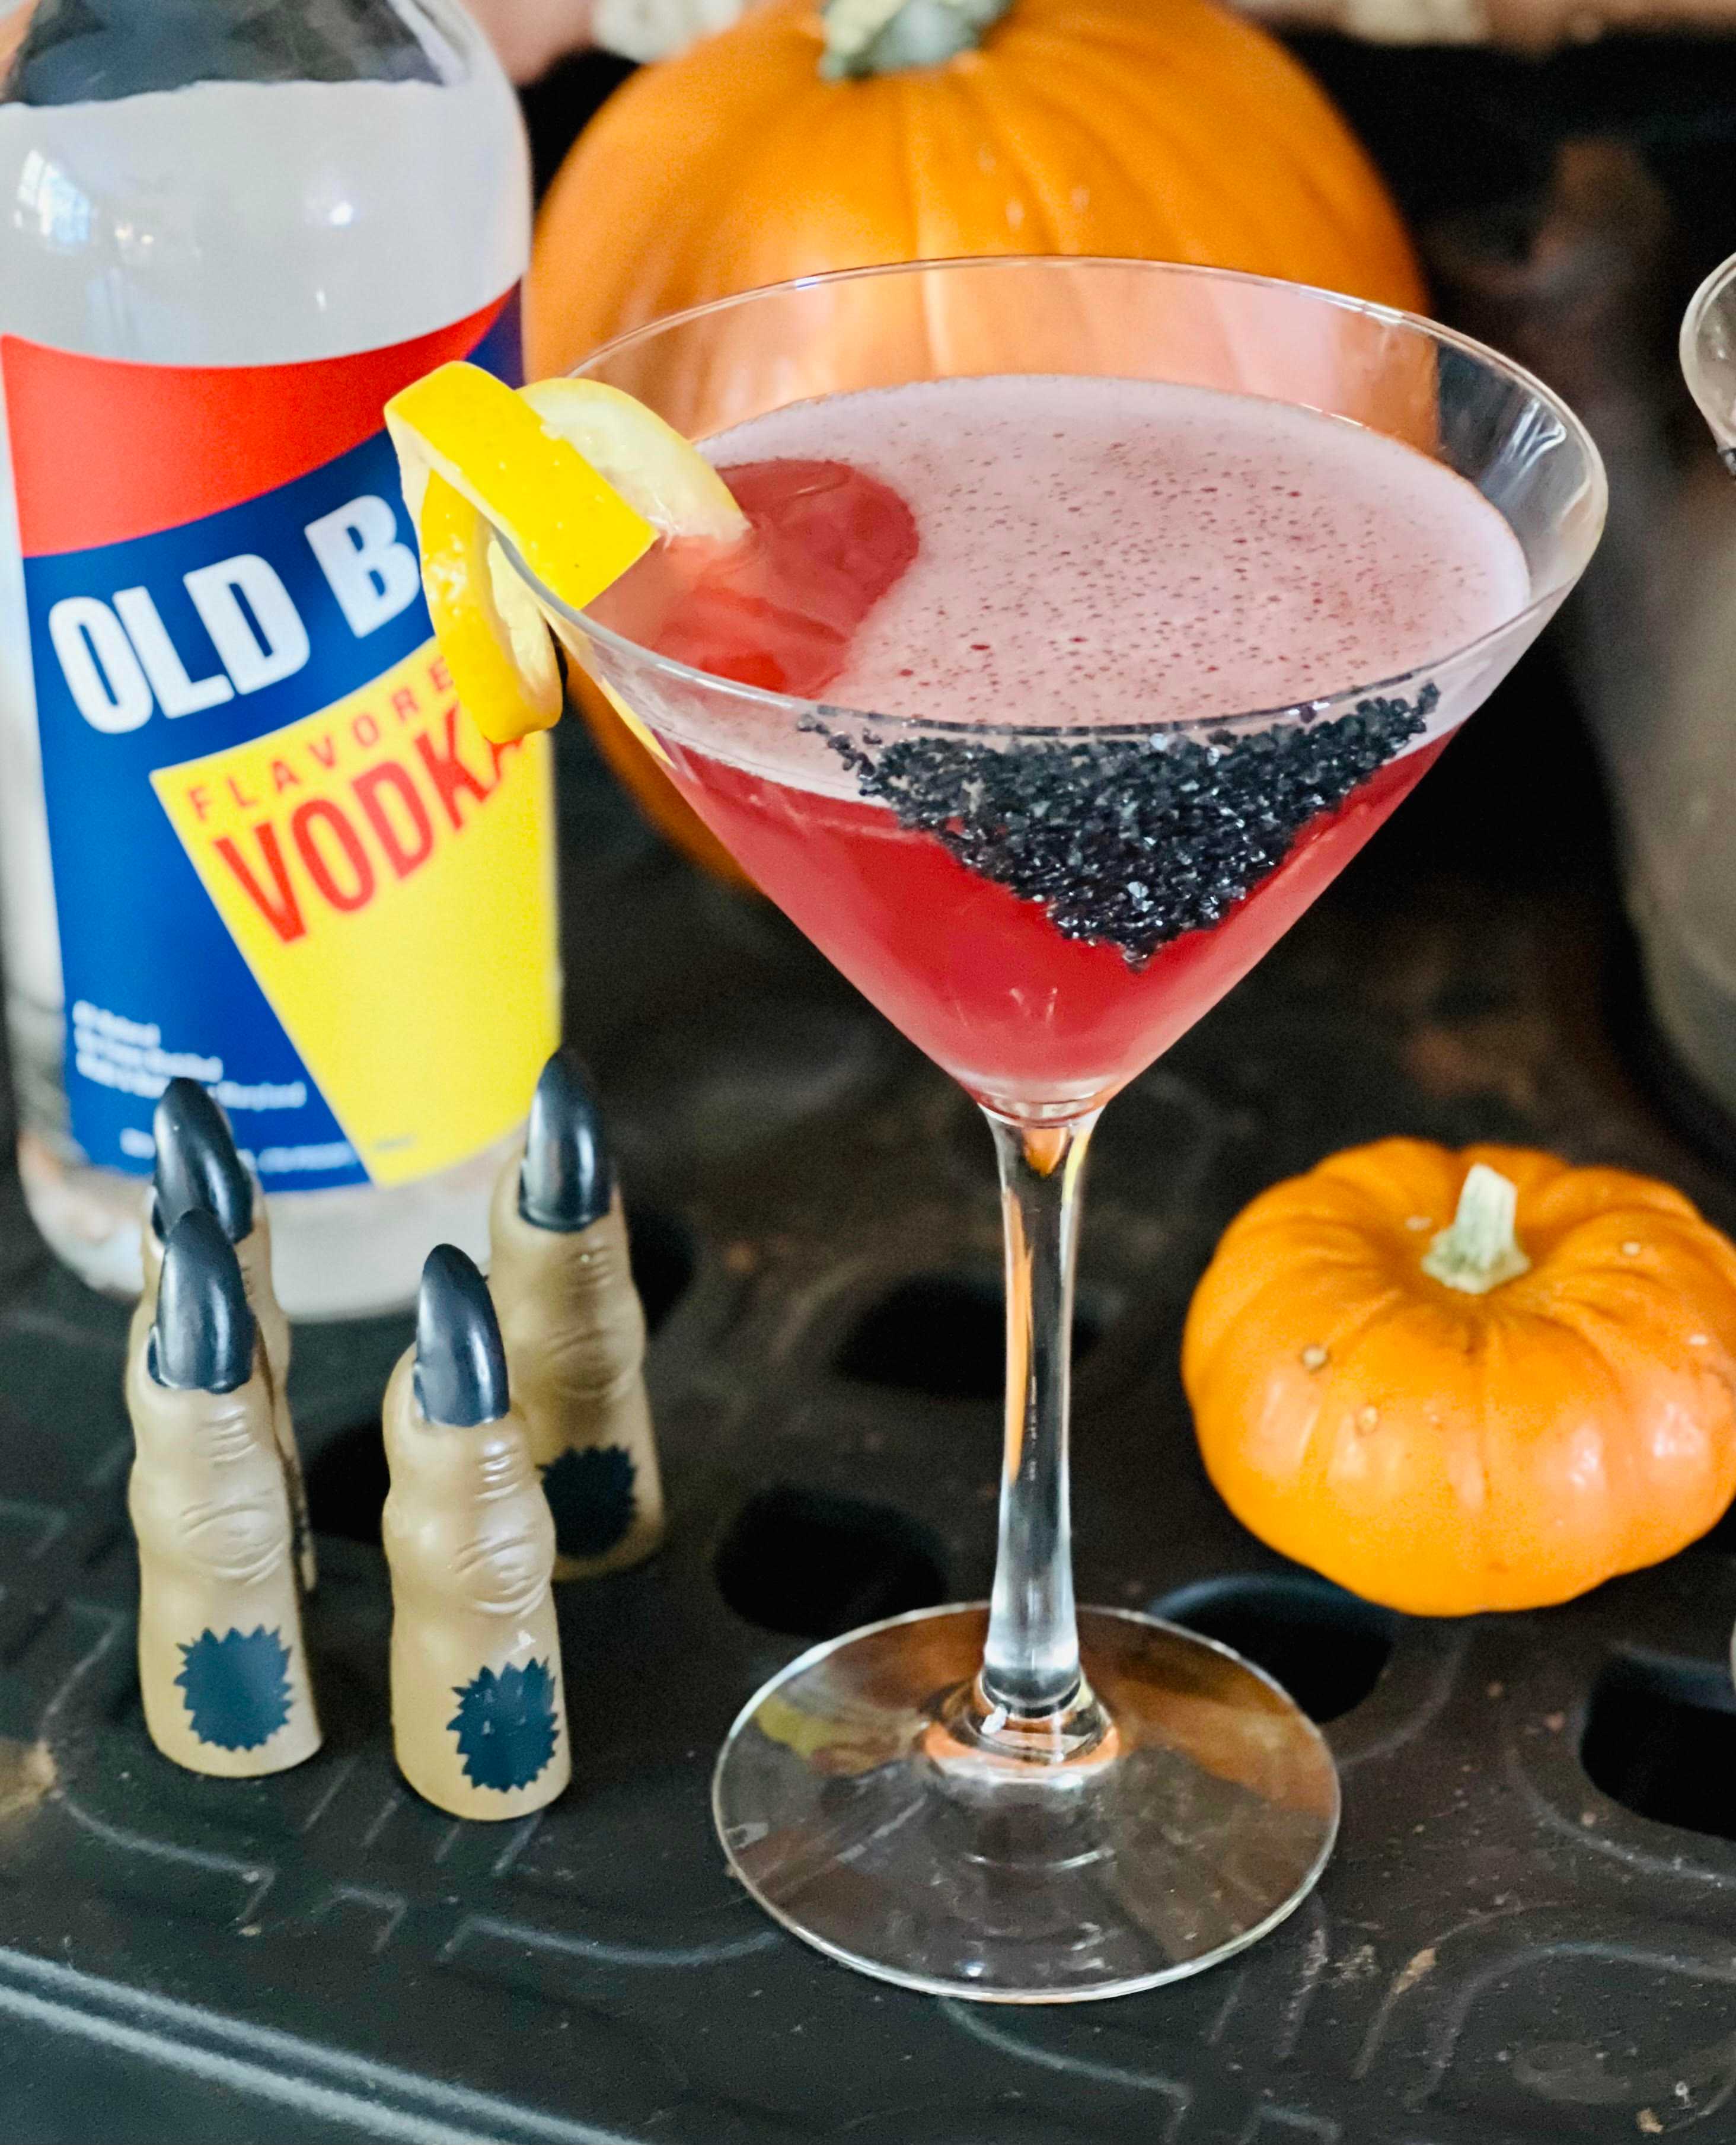 red martini with old bay vodka, pumpkin, and halloween fingers decorations